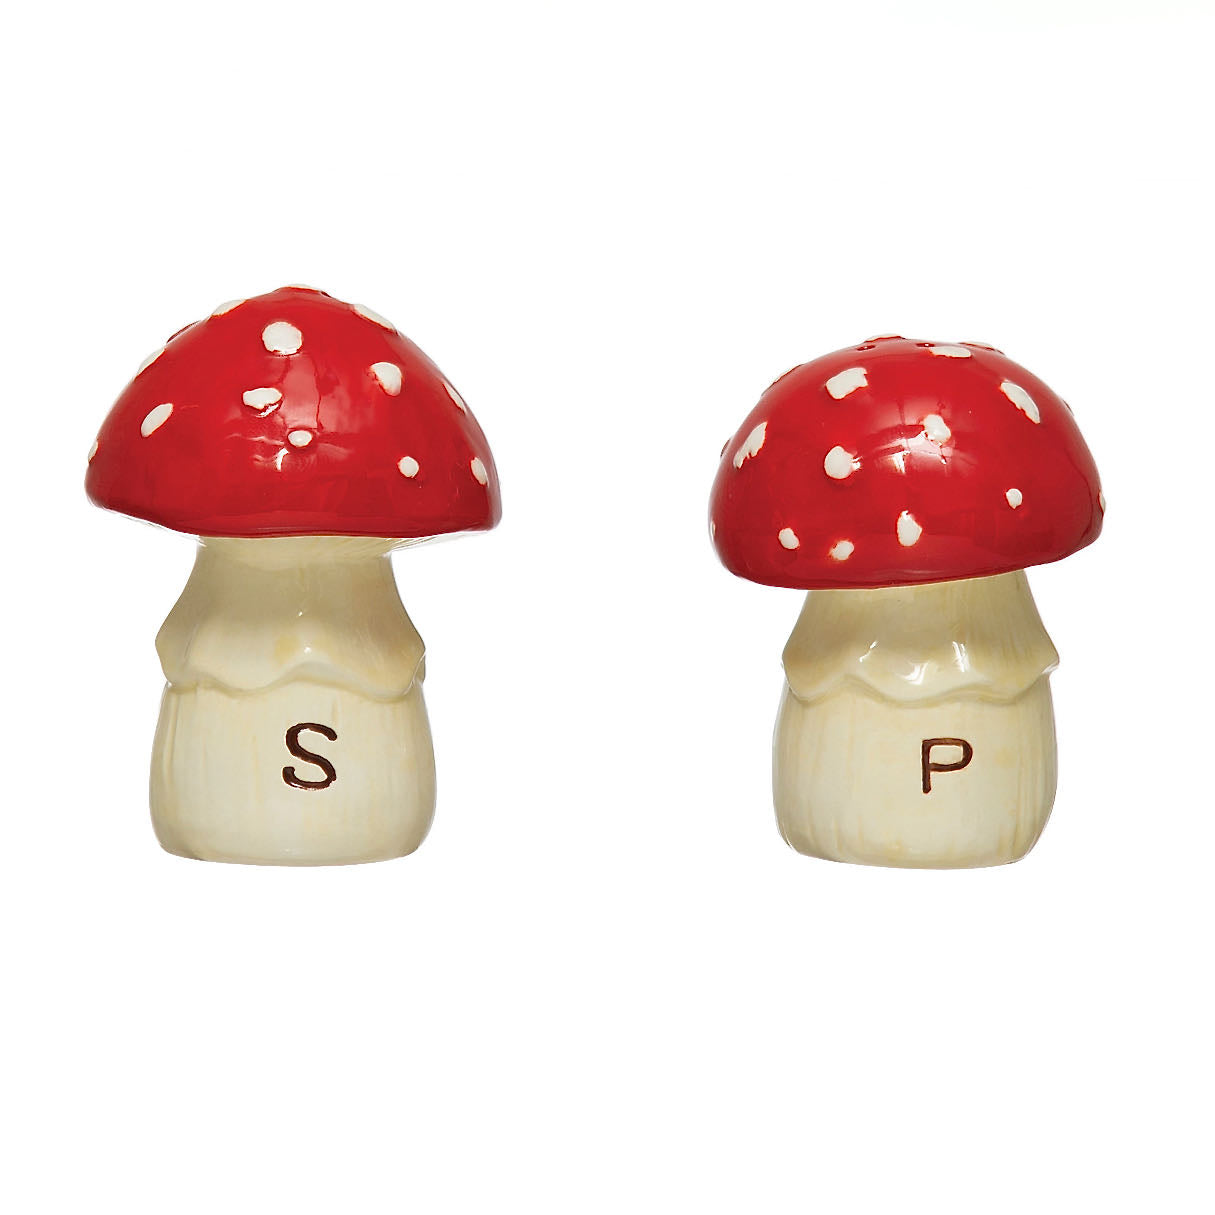 Hand-Painted Cottage Core Mushroom Salt & Pepper Shakers Red & Cream Color